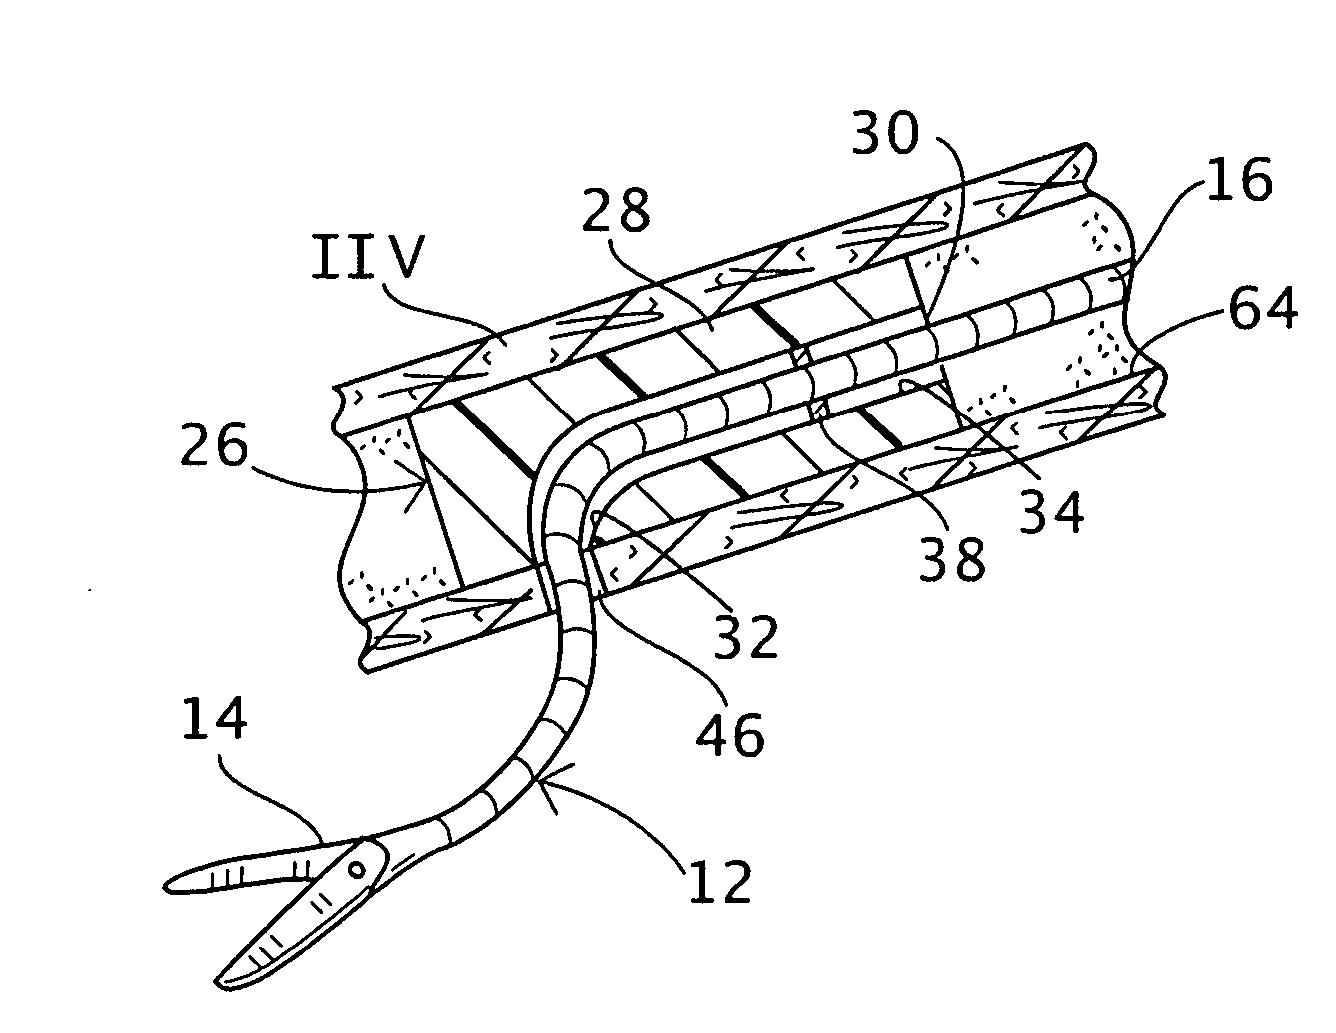 Trans-vascular surgical method and associated device